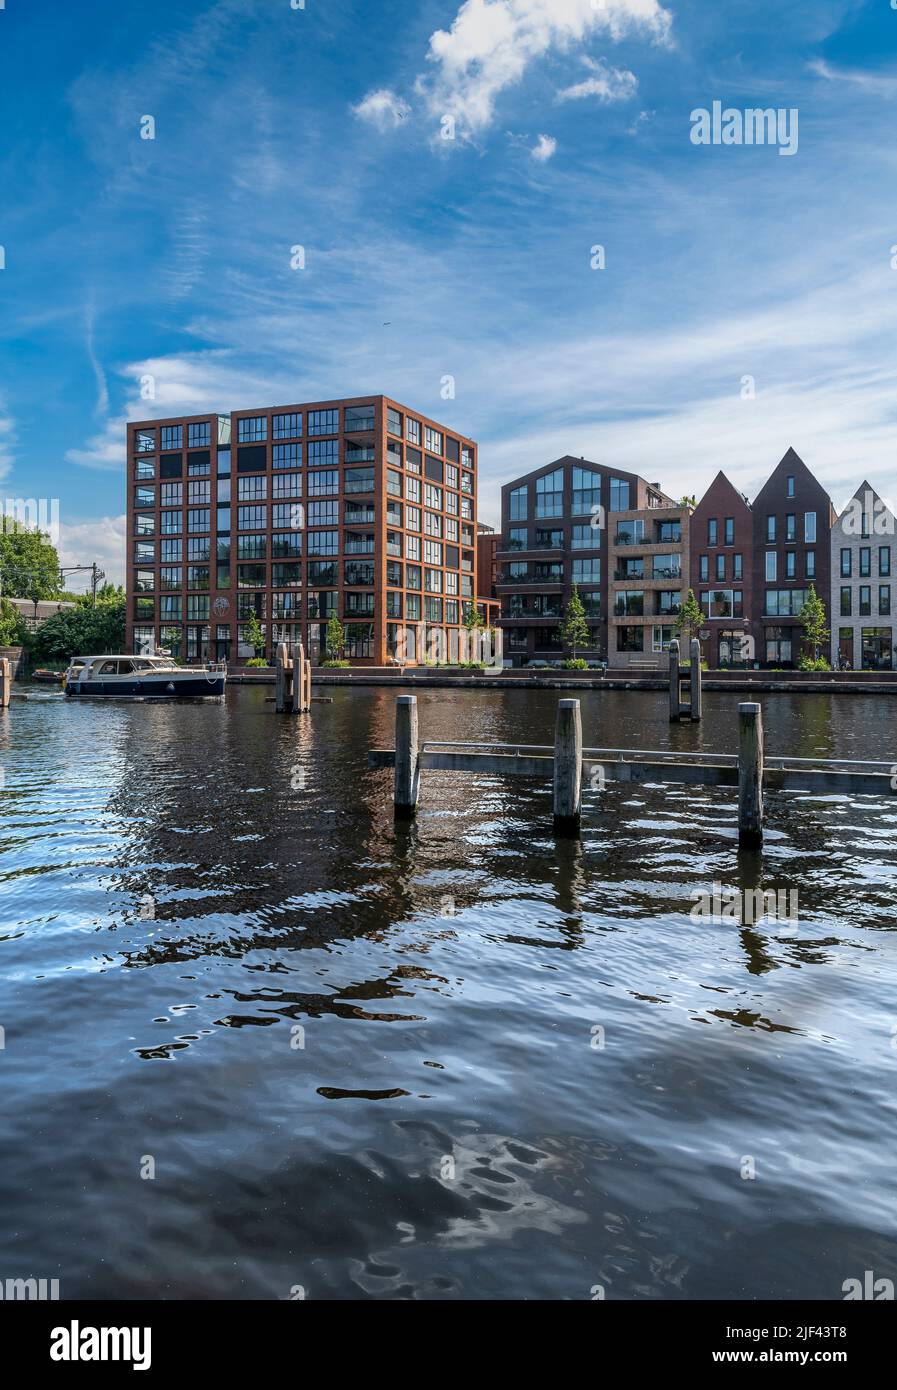 Canal-side living in the beautiful city of Haarlem, west of Amsterdam in The Netherlands. Stock Photo